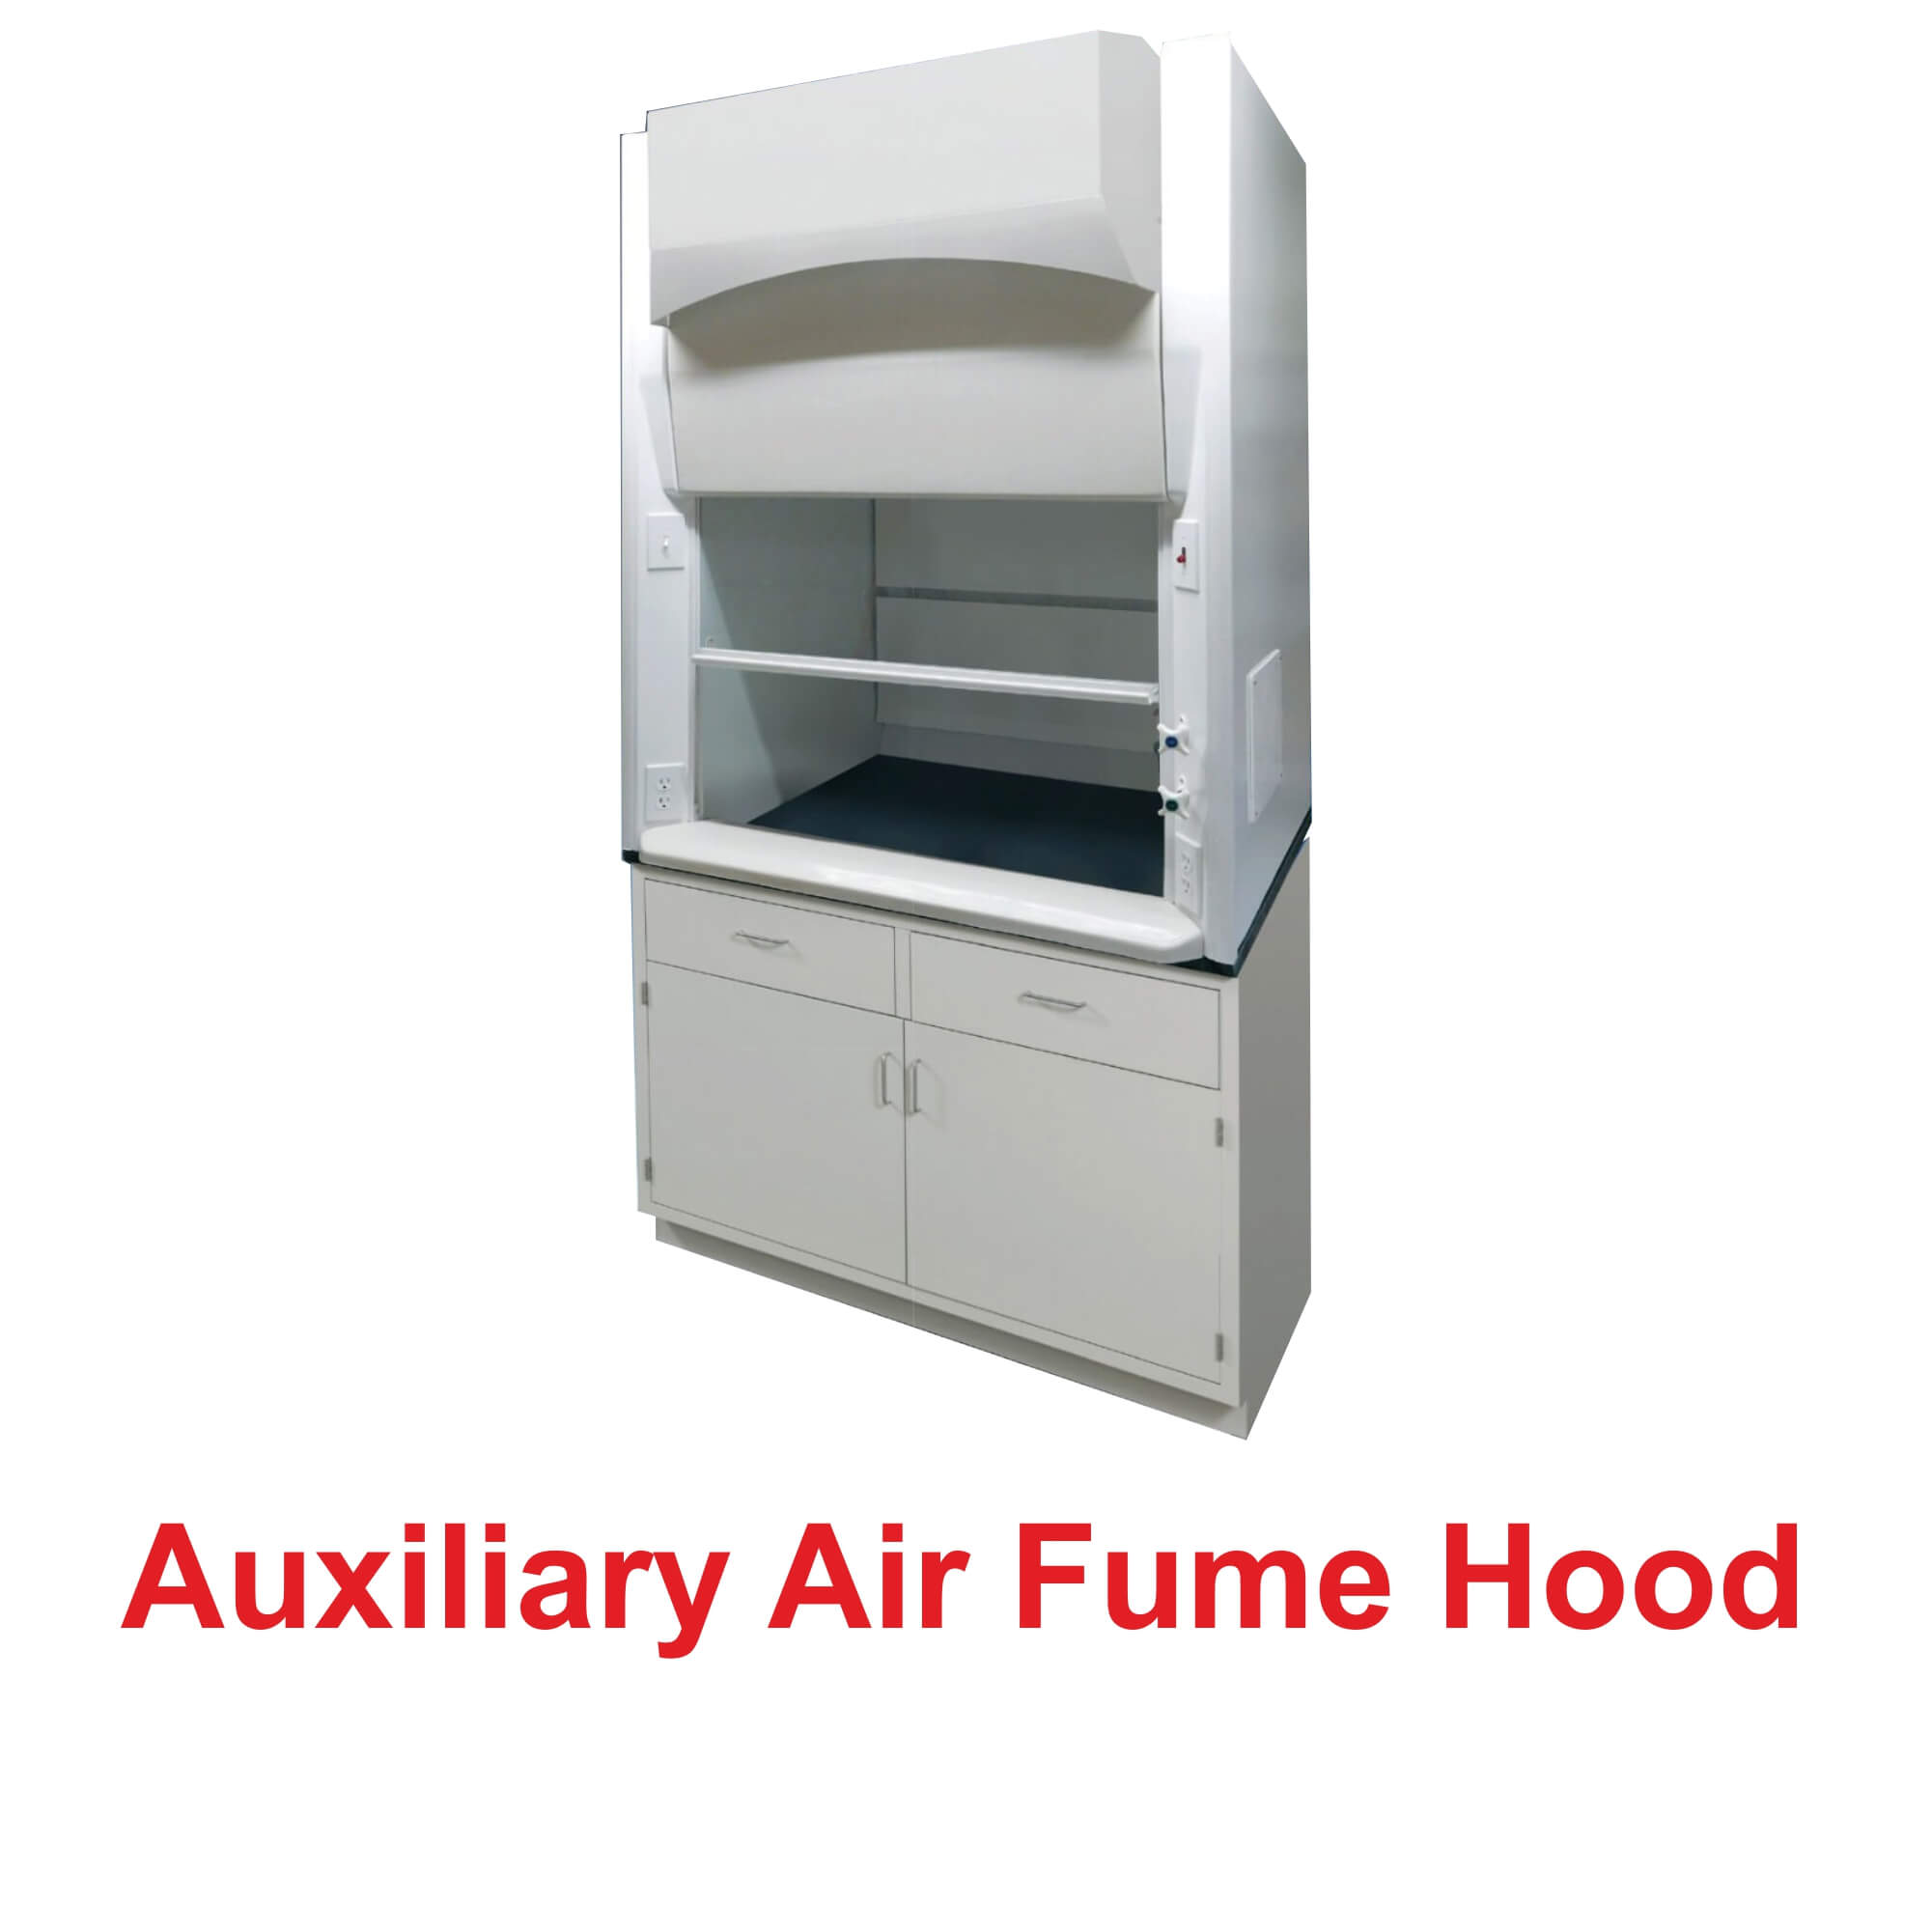 Auxillary Air Fume Hood Manufacturer in India